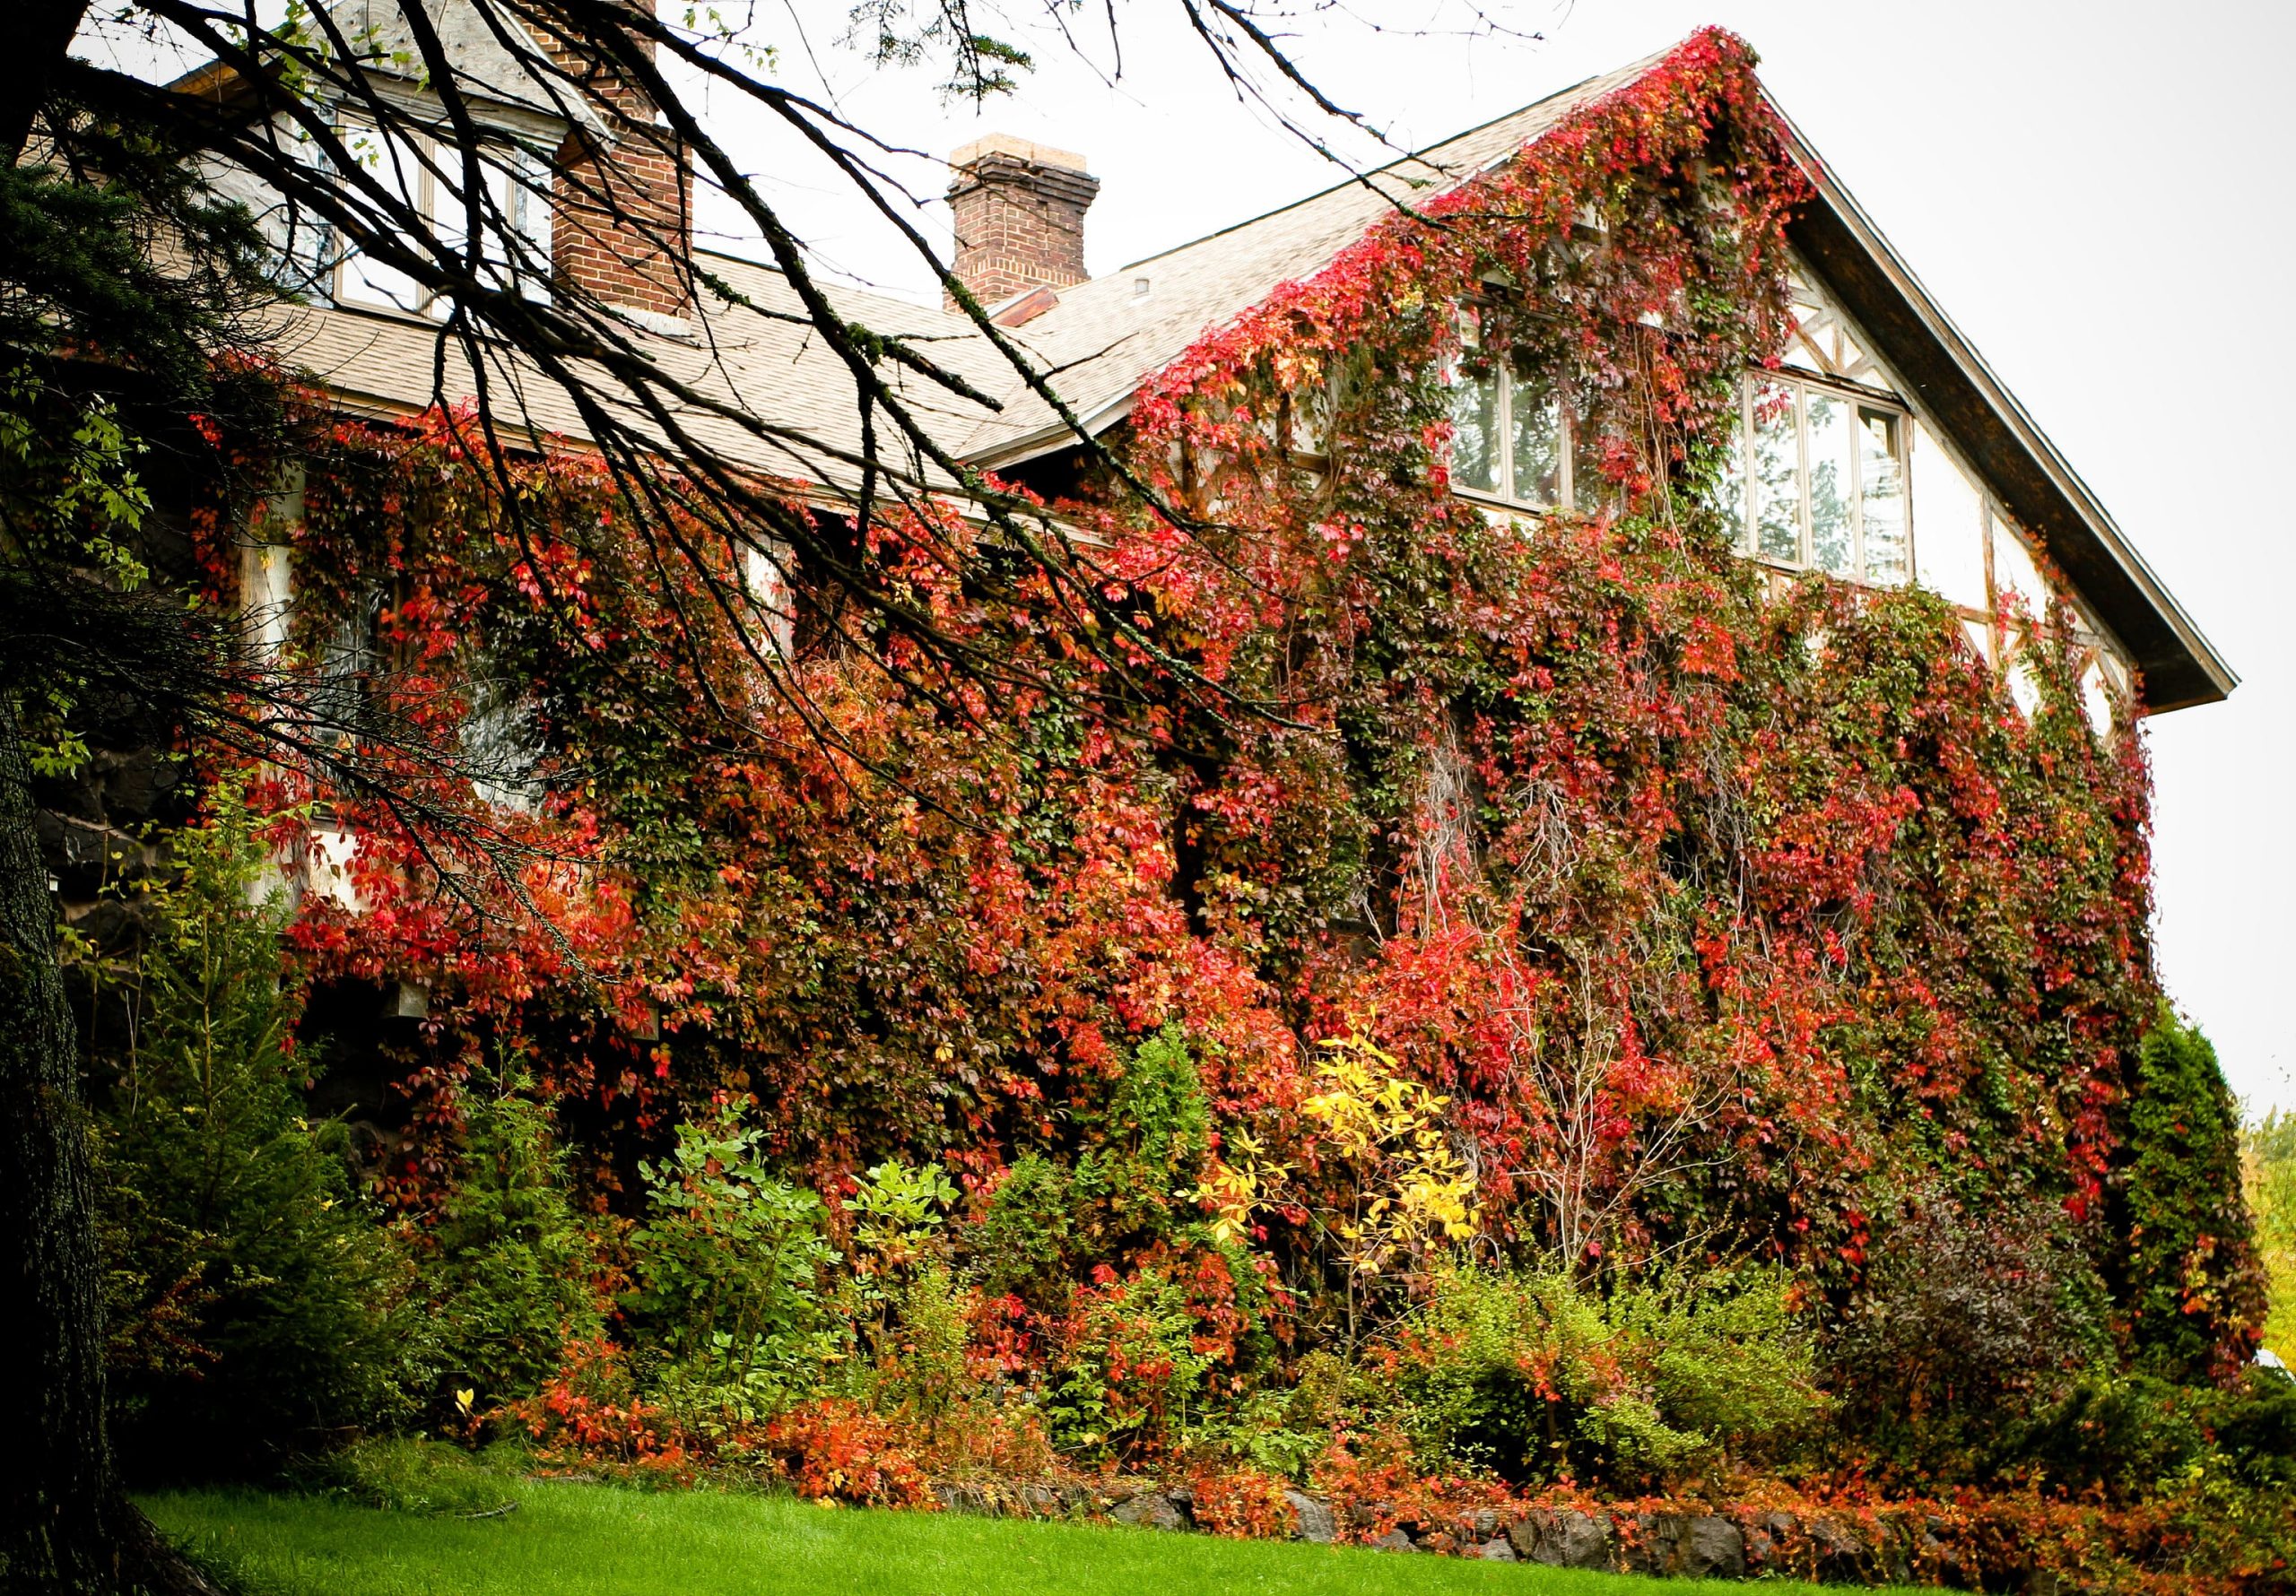 Ivy covering a house